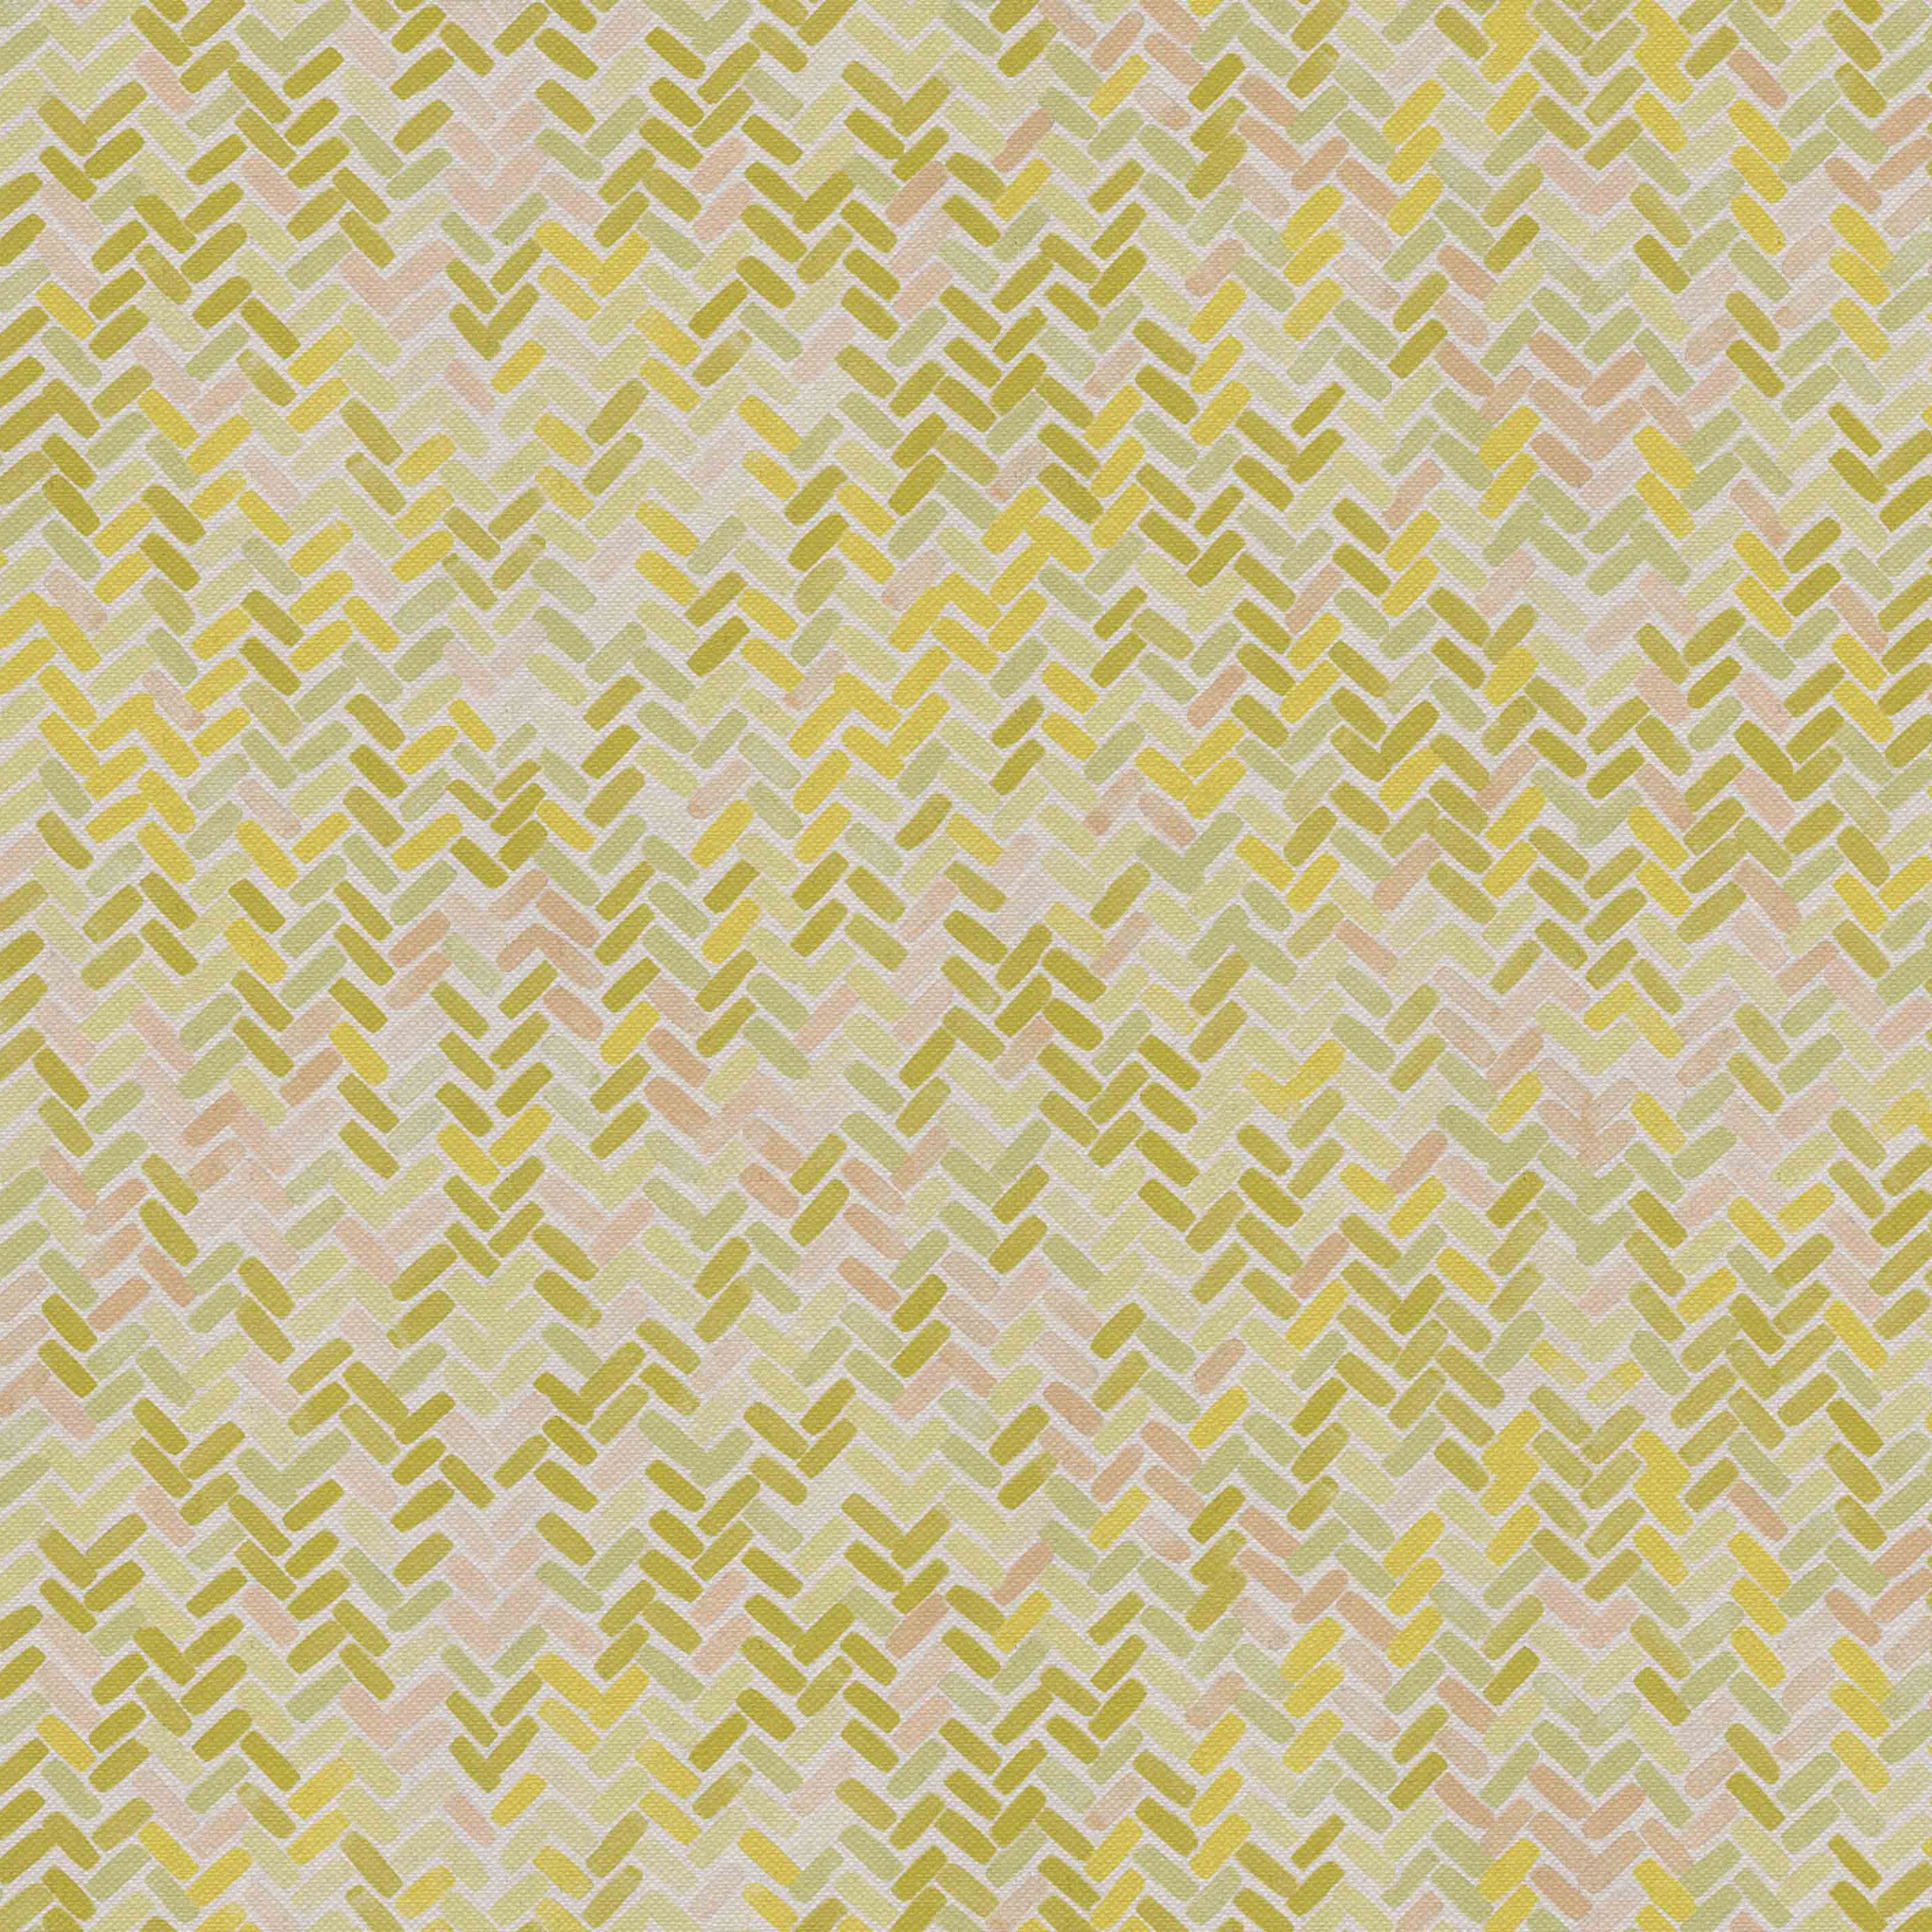 Detail of fabric in a thatched herringbone pattern in shades of yellow, pink and green.